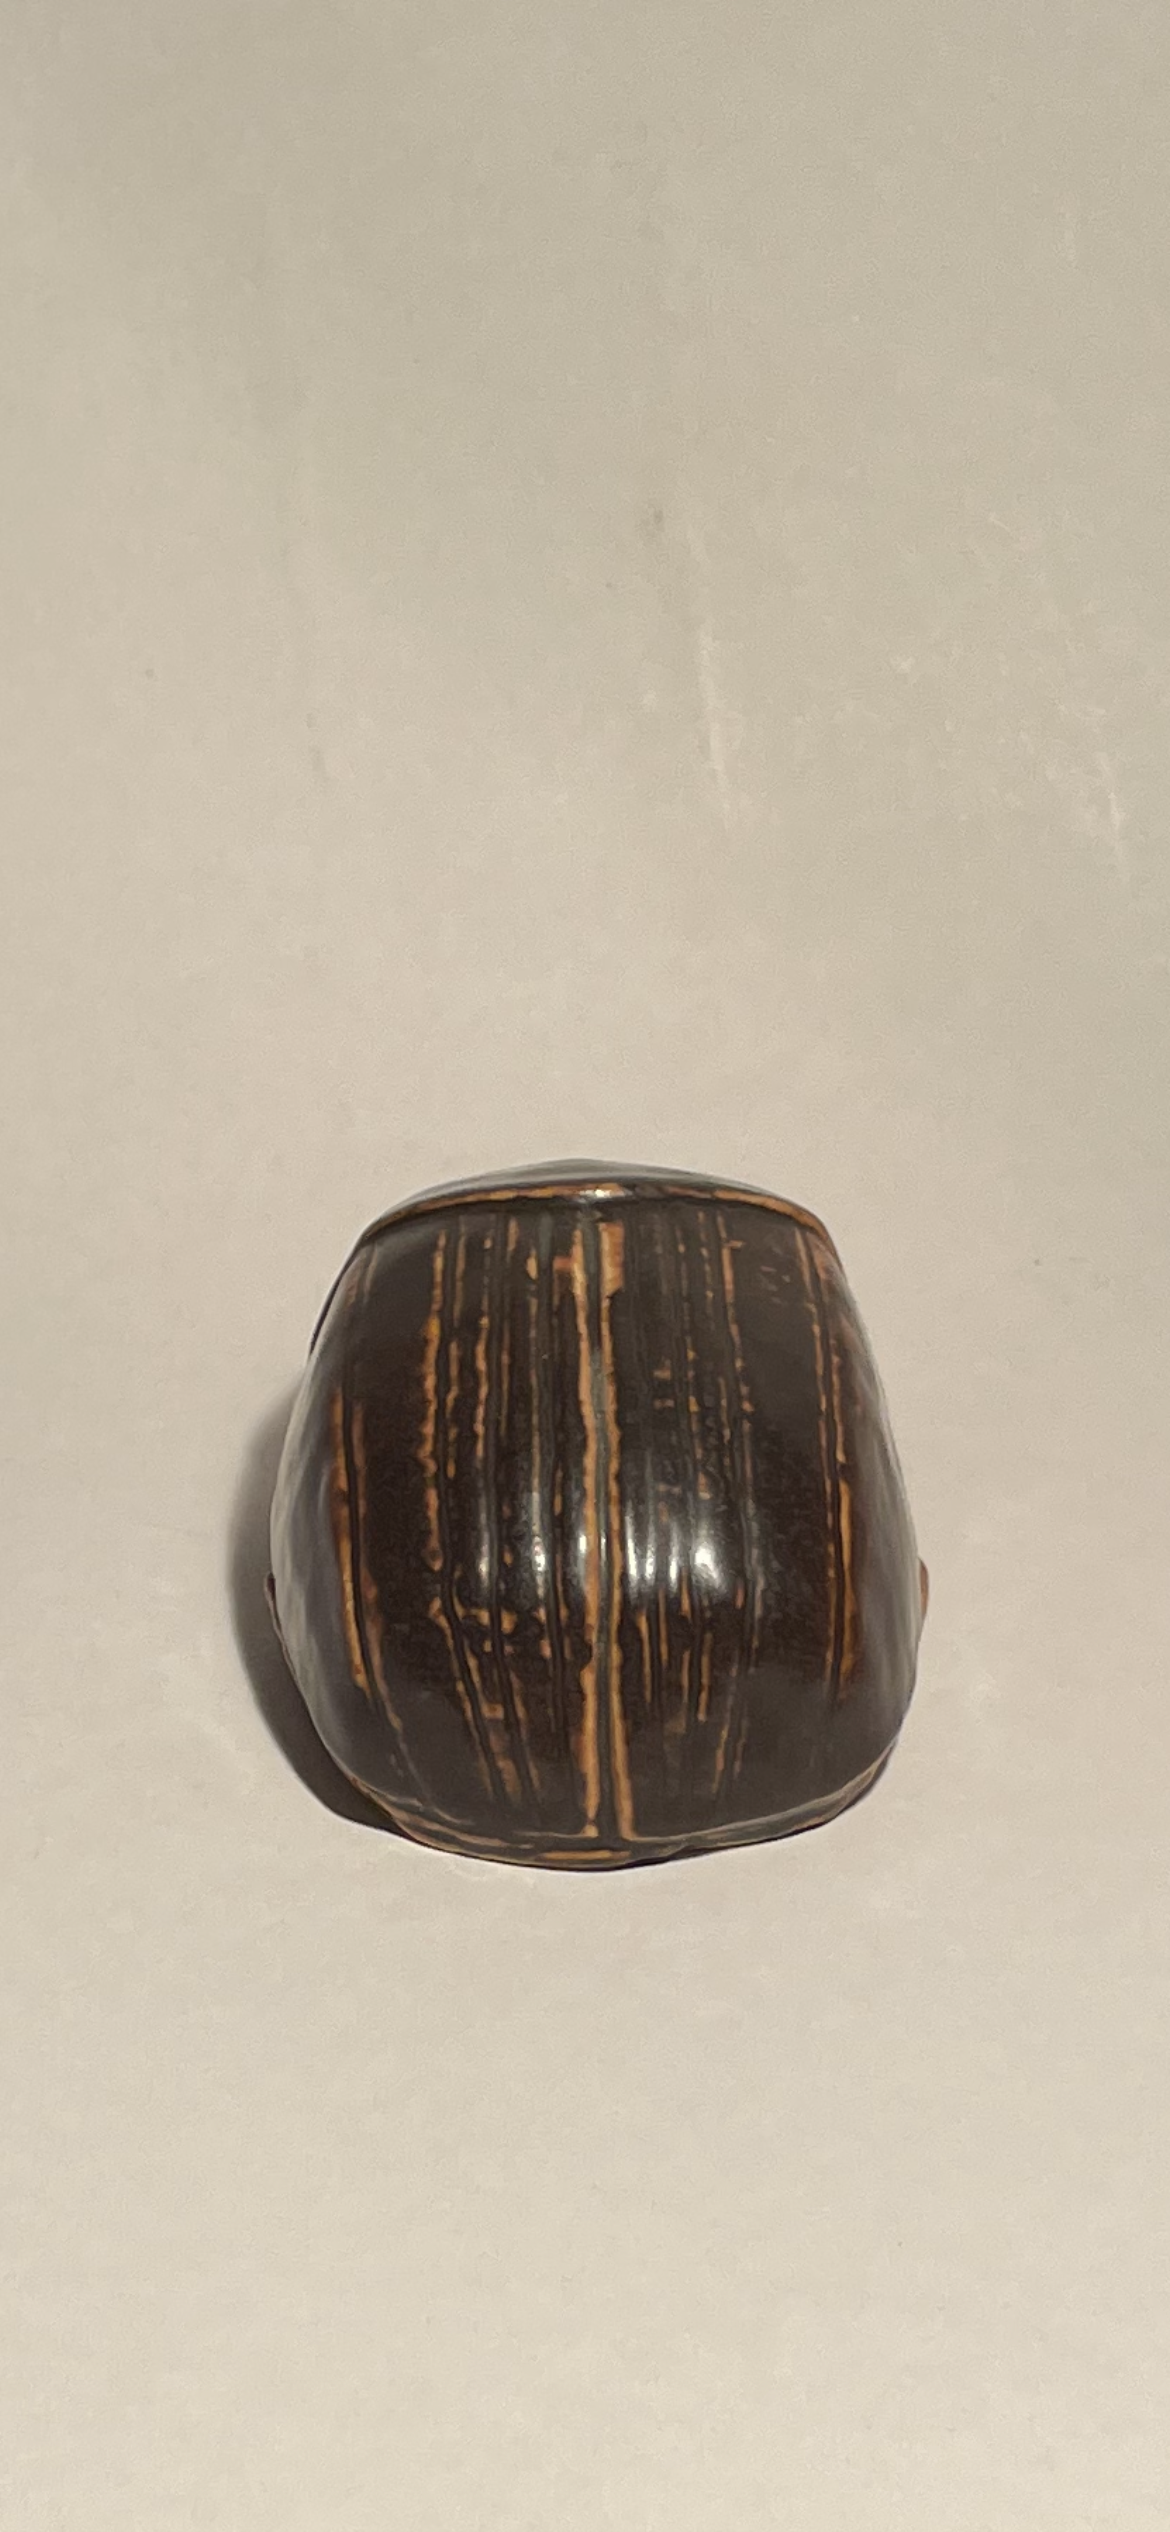 Rare Egyptian Scarab in stoneware from Bing and Grøndahl - no. 01320